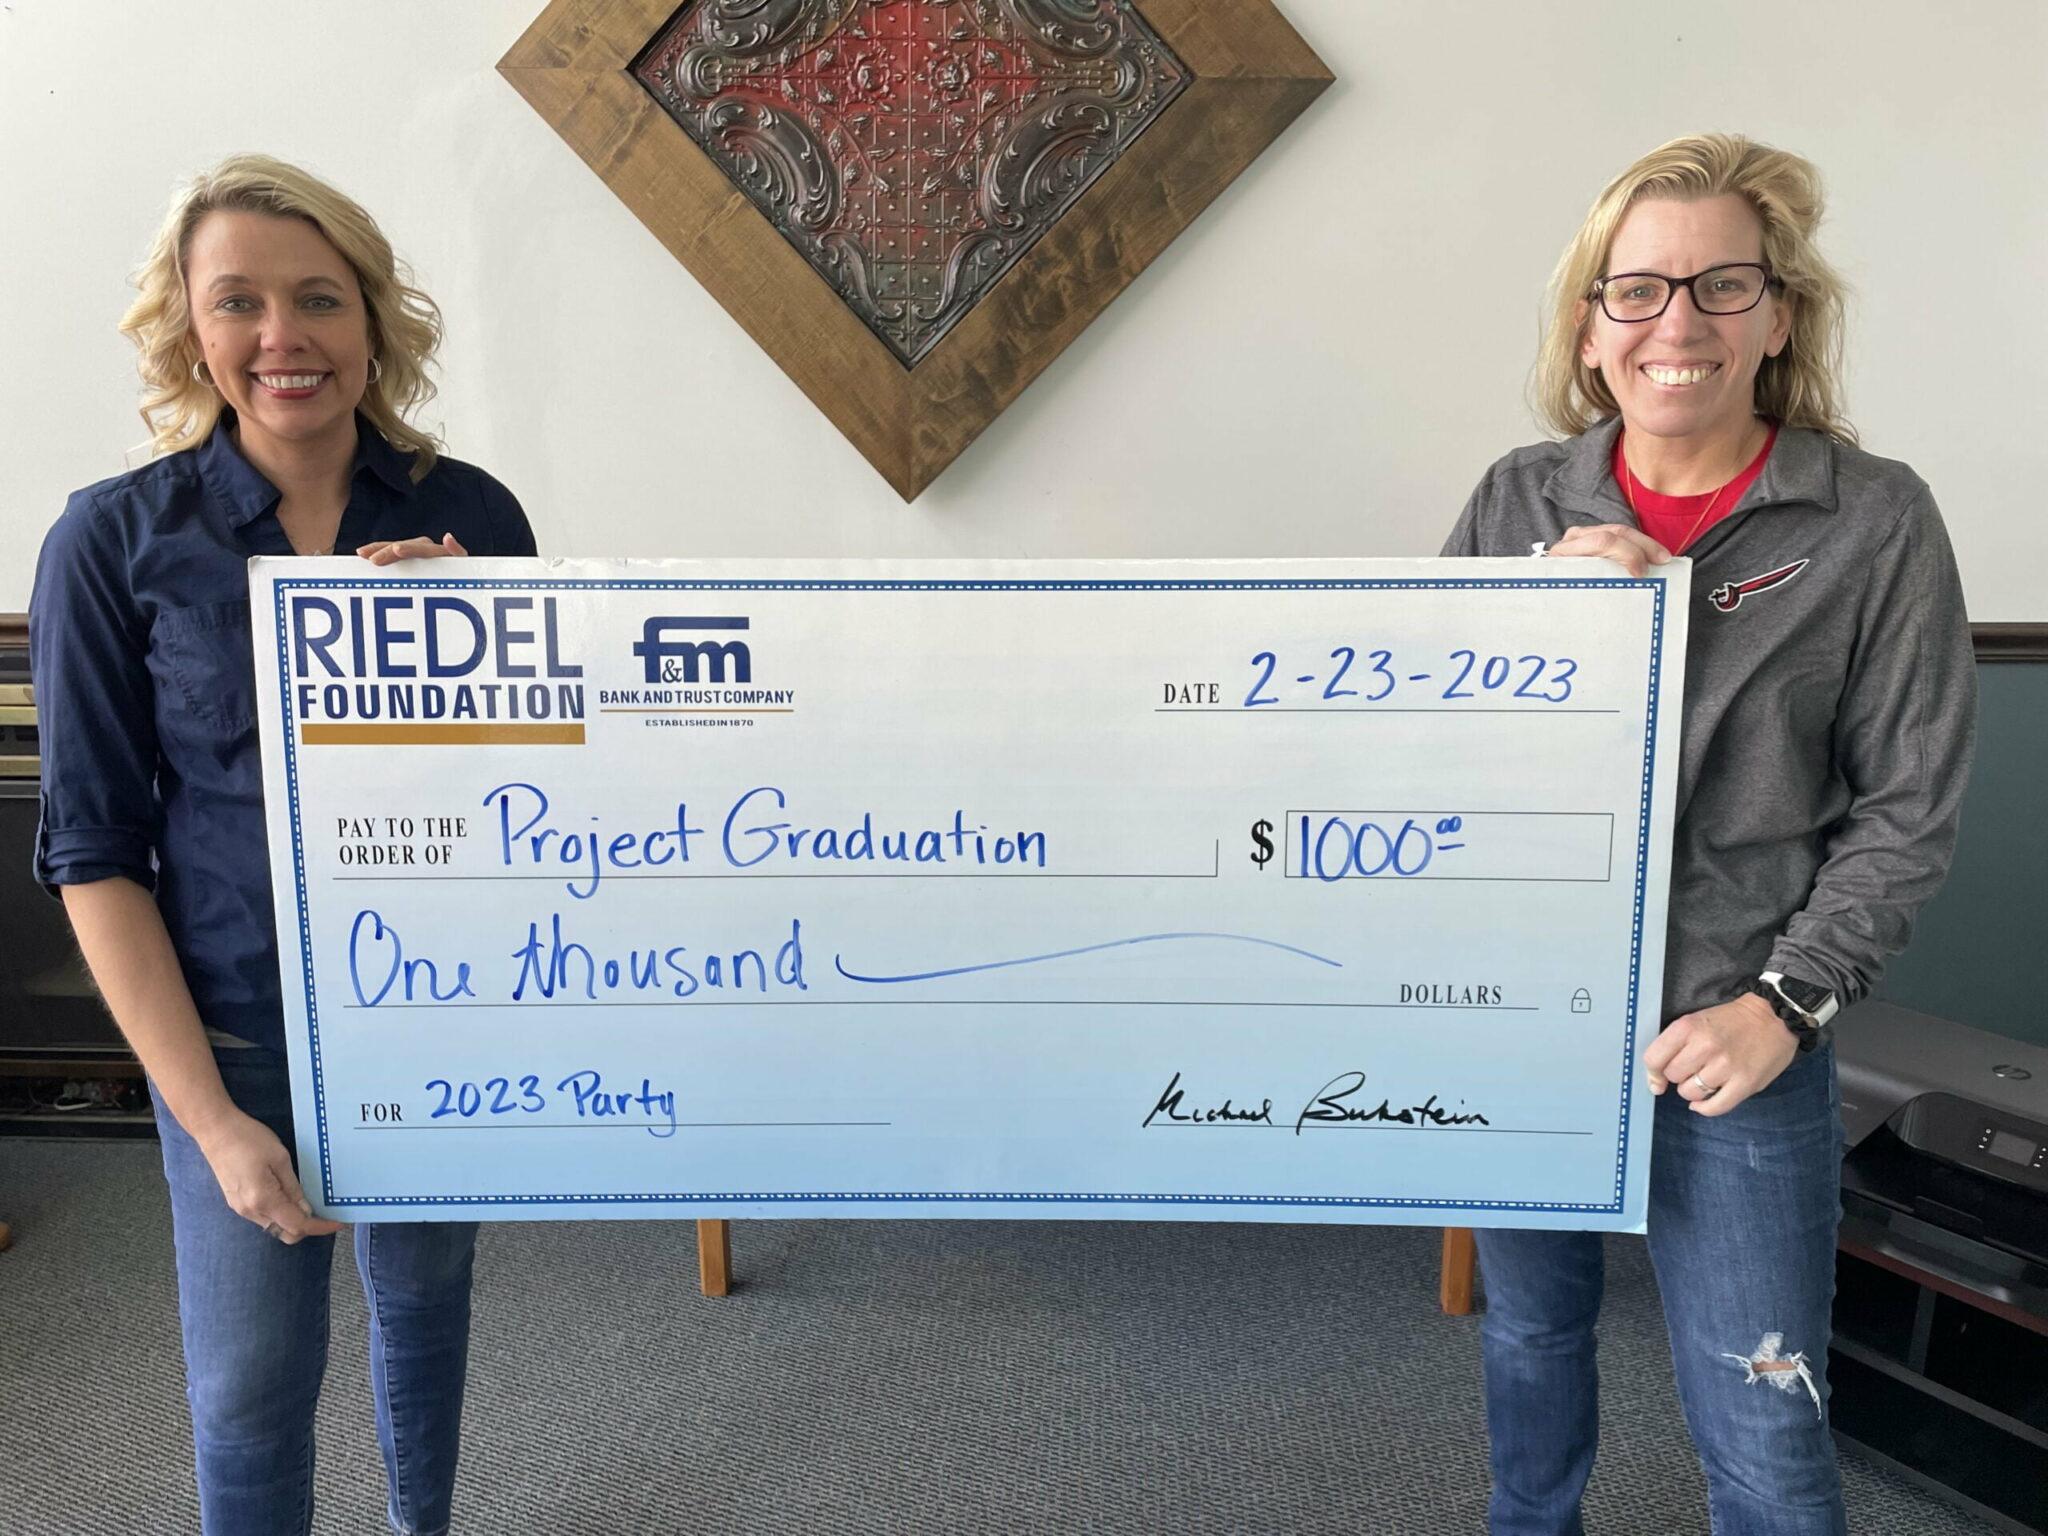 Riedel Foundation Awards $1,000 for Hannibal’s Project Graduation